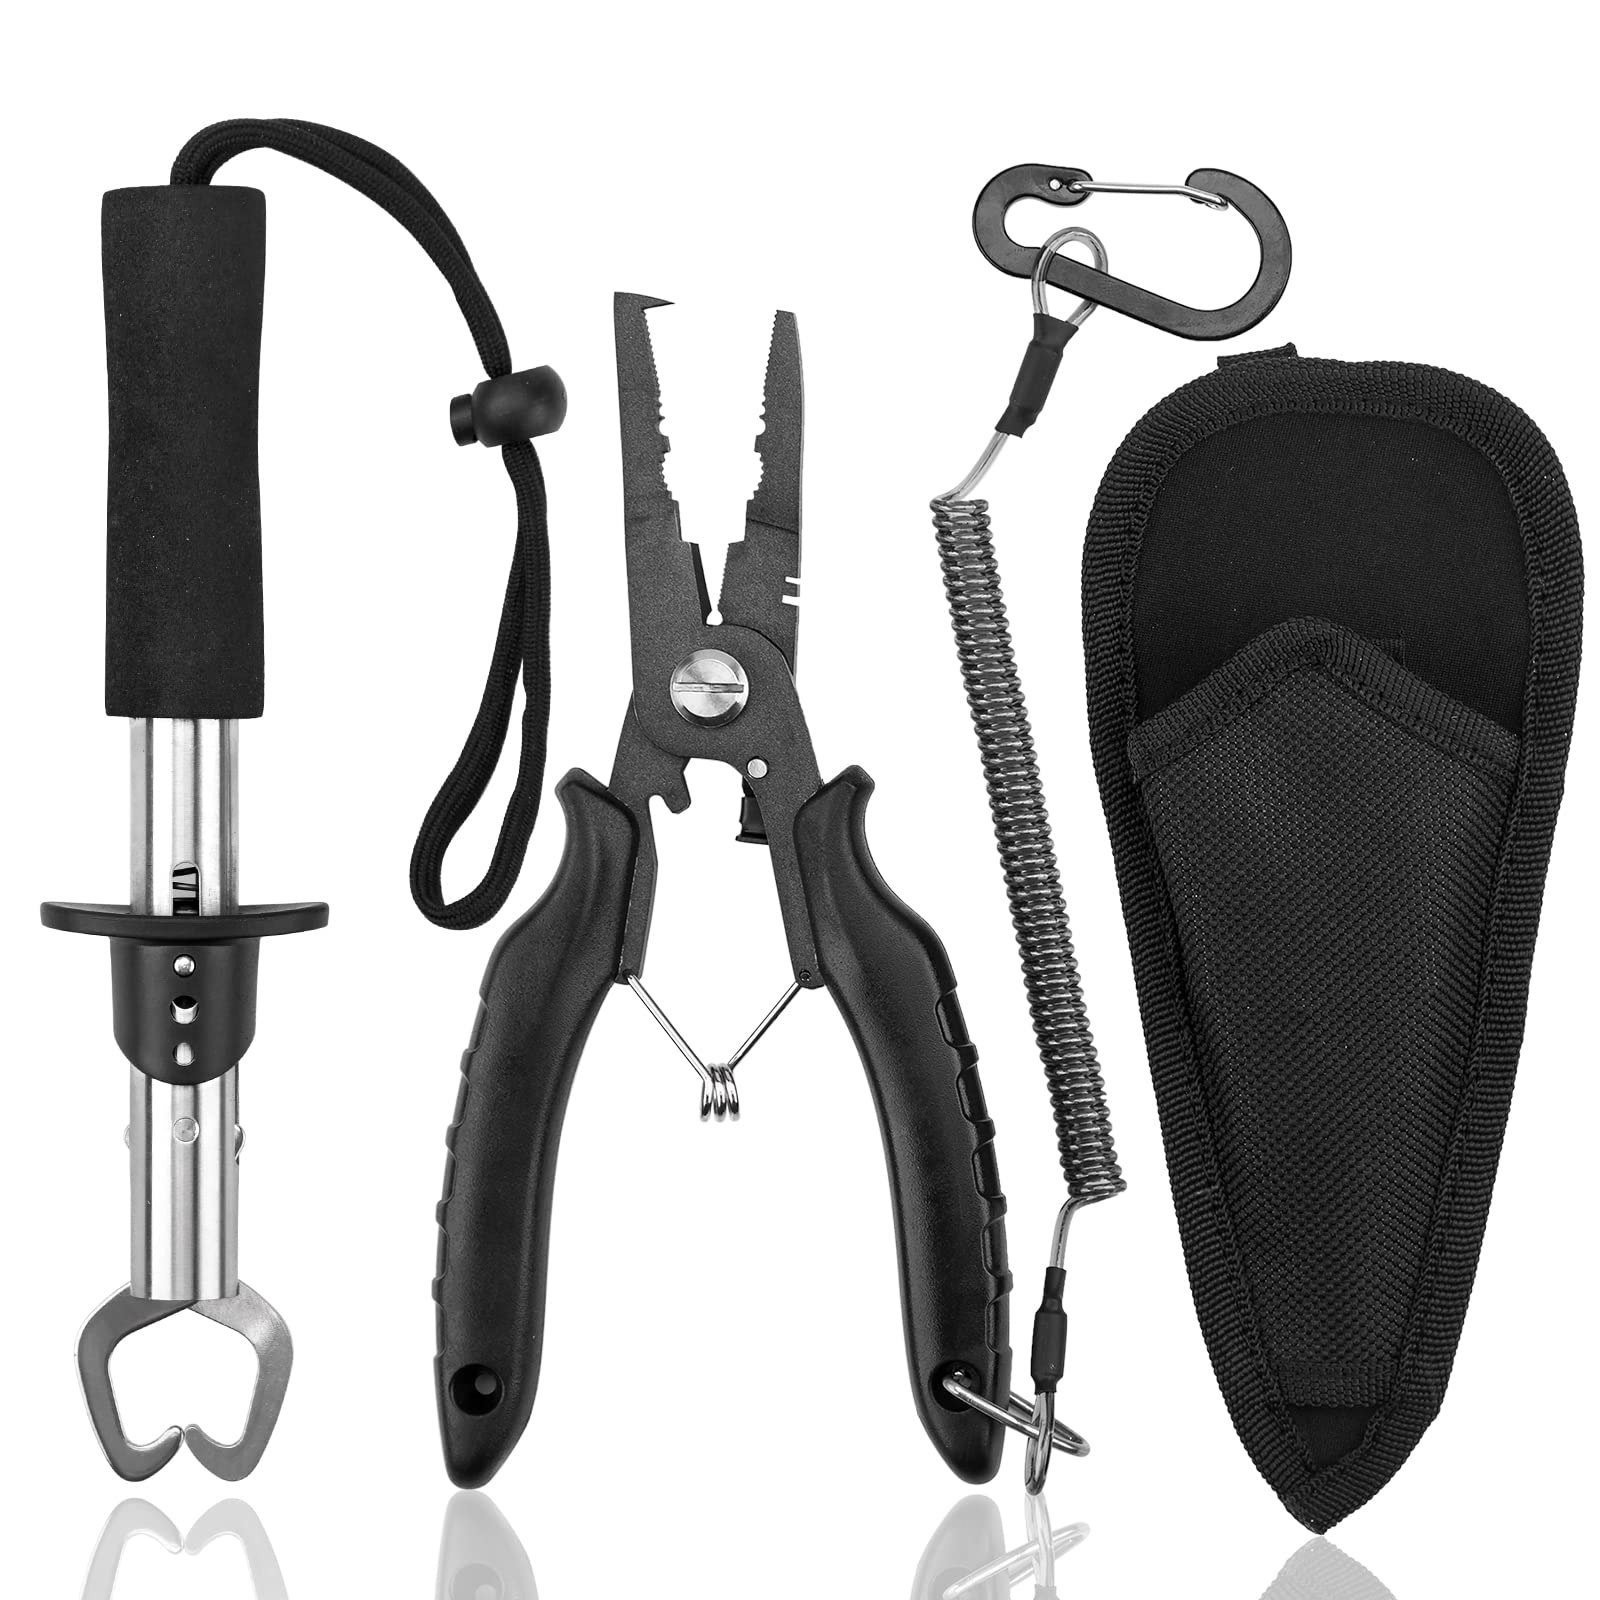 3PC Fishing Tools Kit, Fishing Pliers with Sheath, Hook Remover Tool, Fish  Lip Gripper, Saltwater Fishing Gear Equipment with Retractable Lanyard, Fly  Fishing Gifts for Men, Women, Fisherman - MossyOakKnivesShop